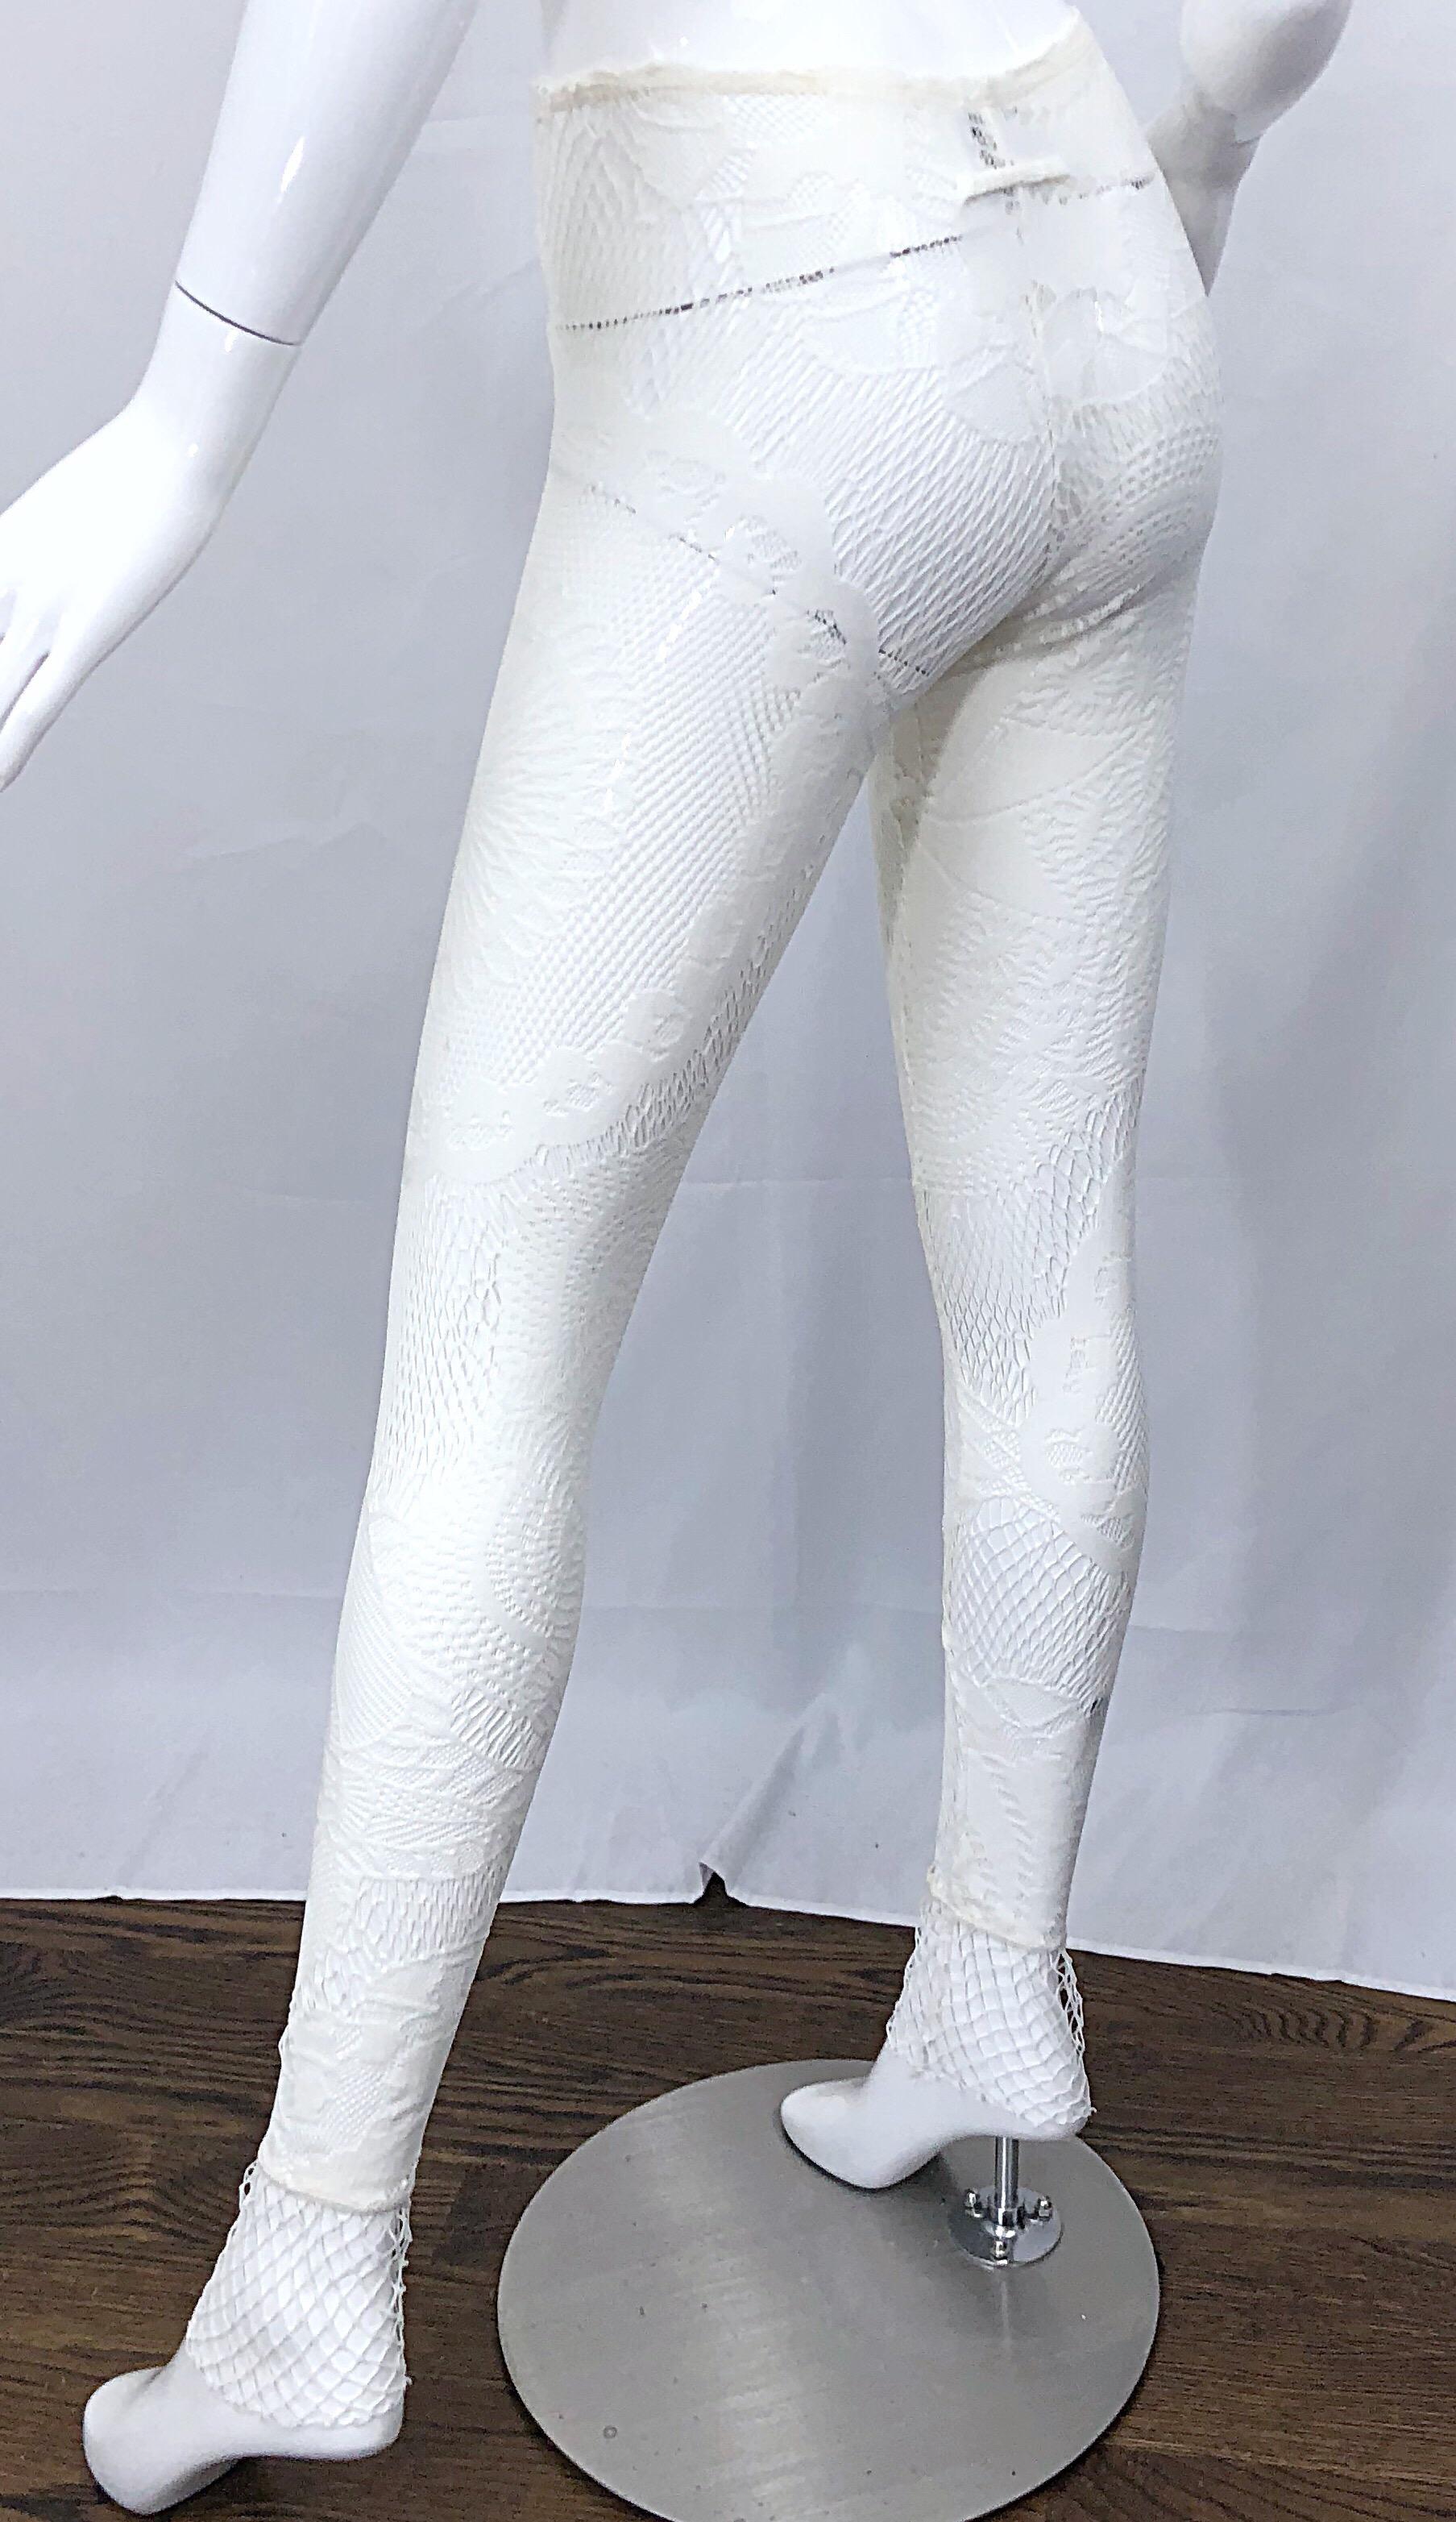 New 1990s Jean Paul Gaultier Sheer Fishnet White  Vintage 90s Leggings Stockings In New Condition For Sale In San Diego, CA